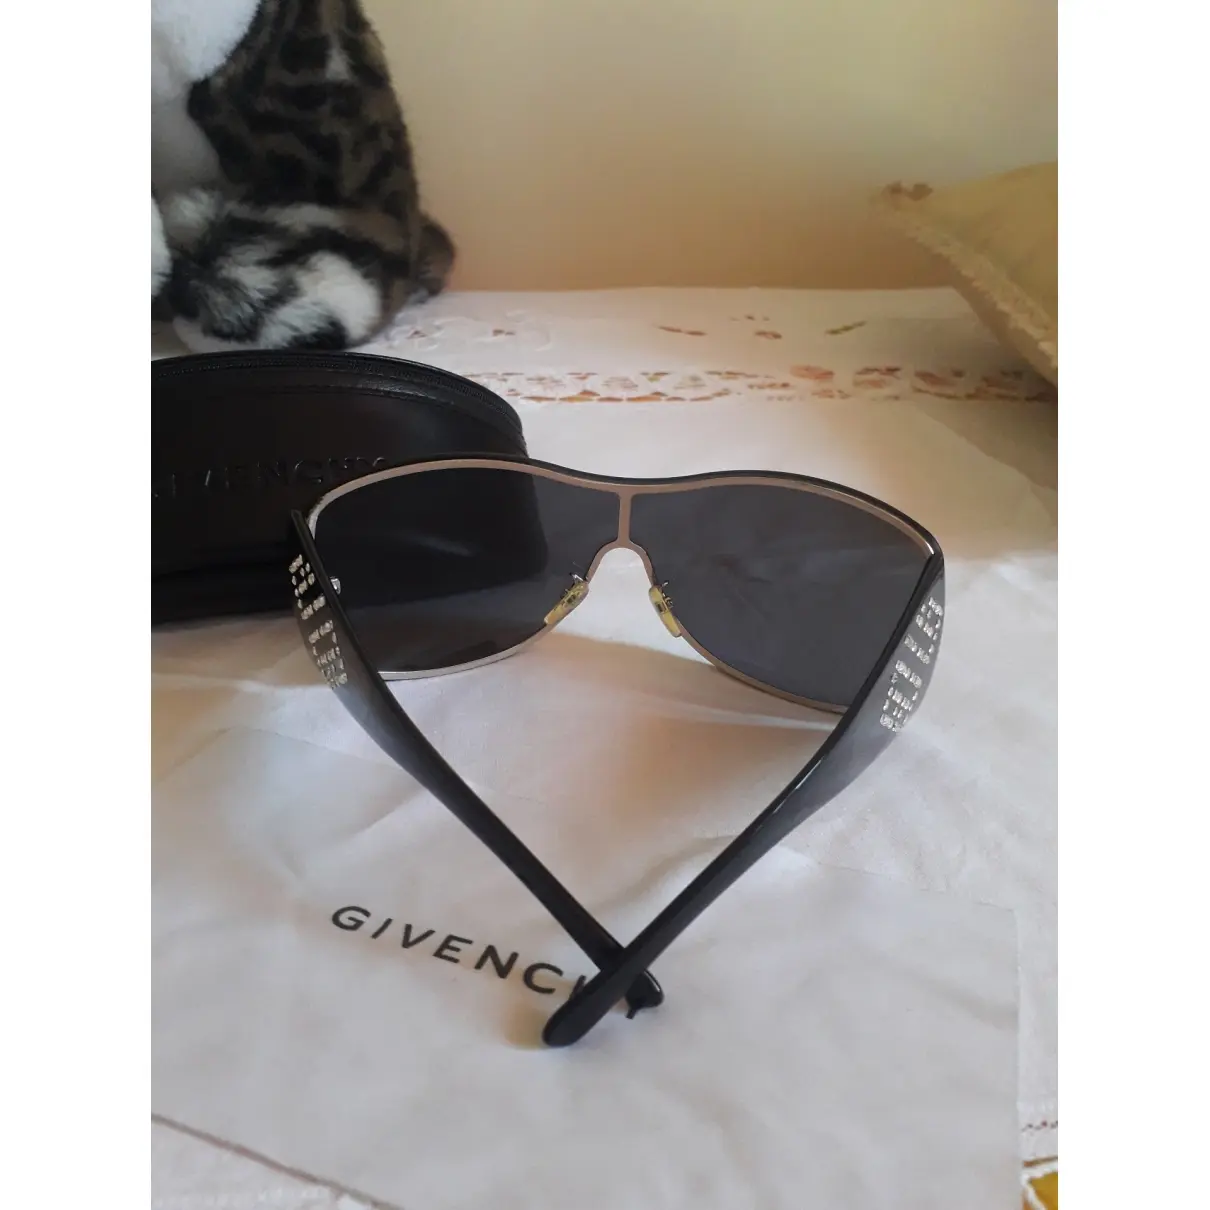 Buy Givenchy Goggle glasses online